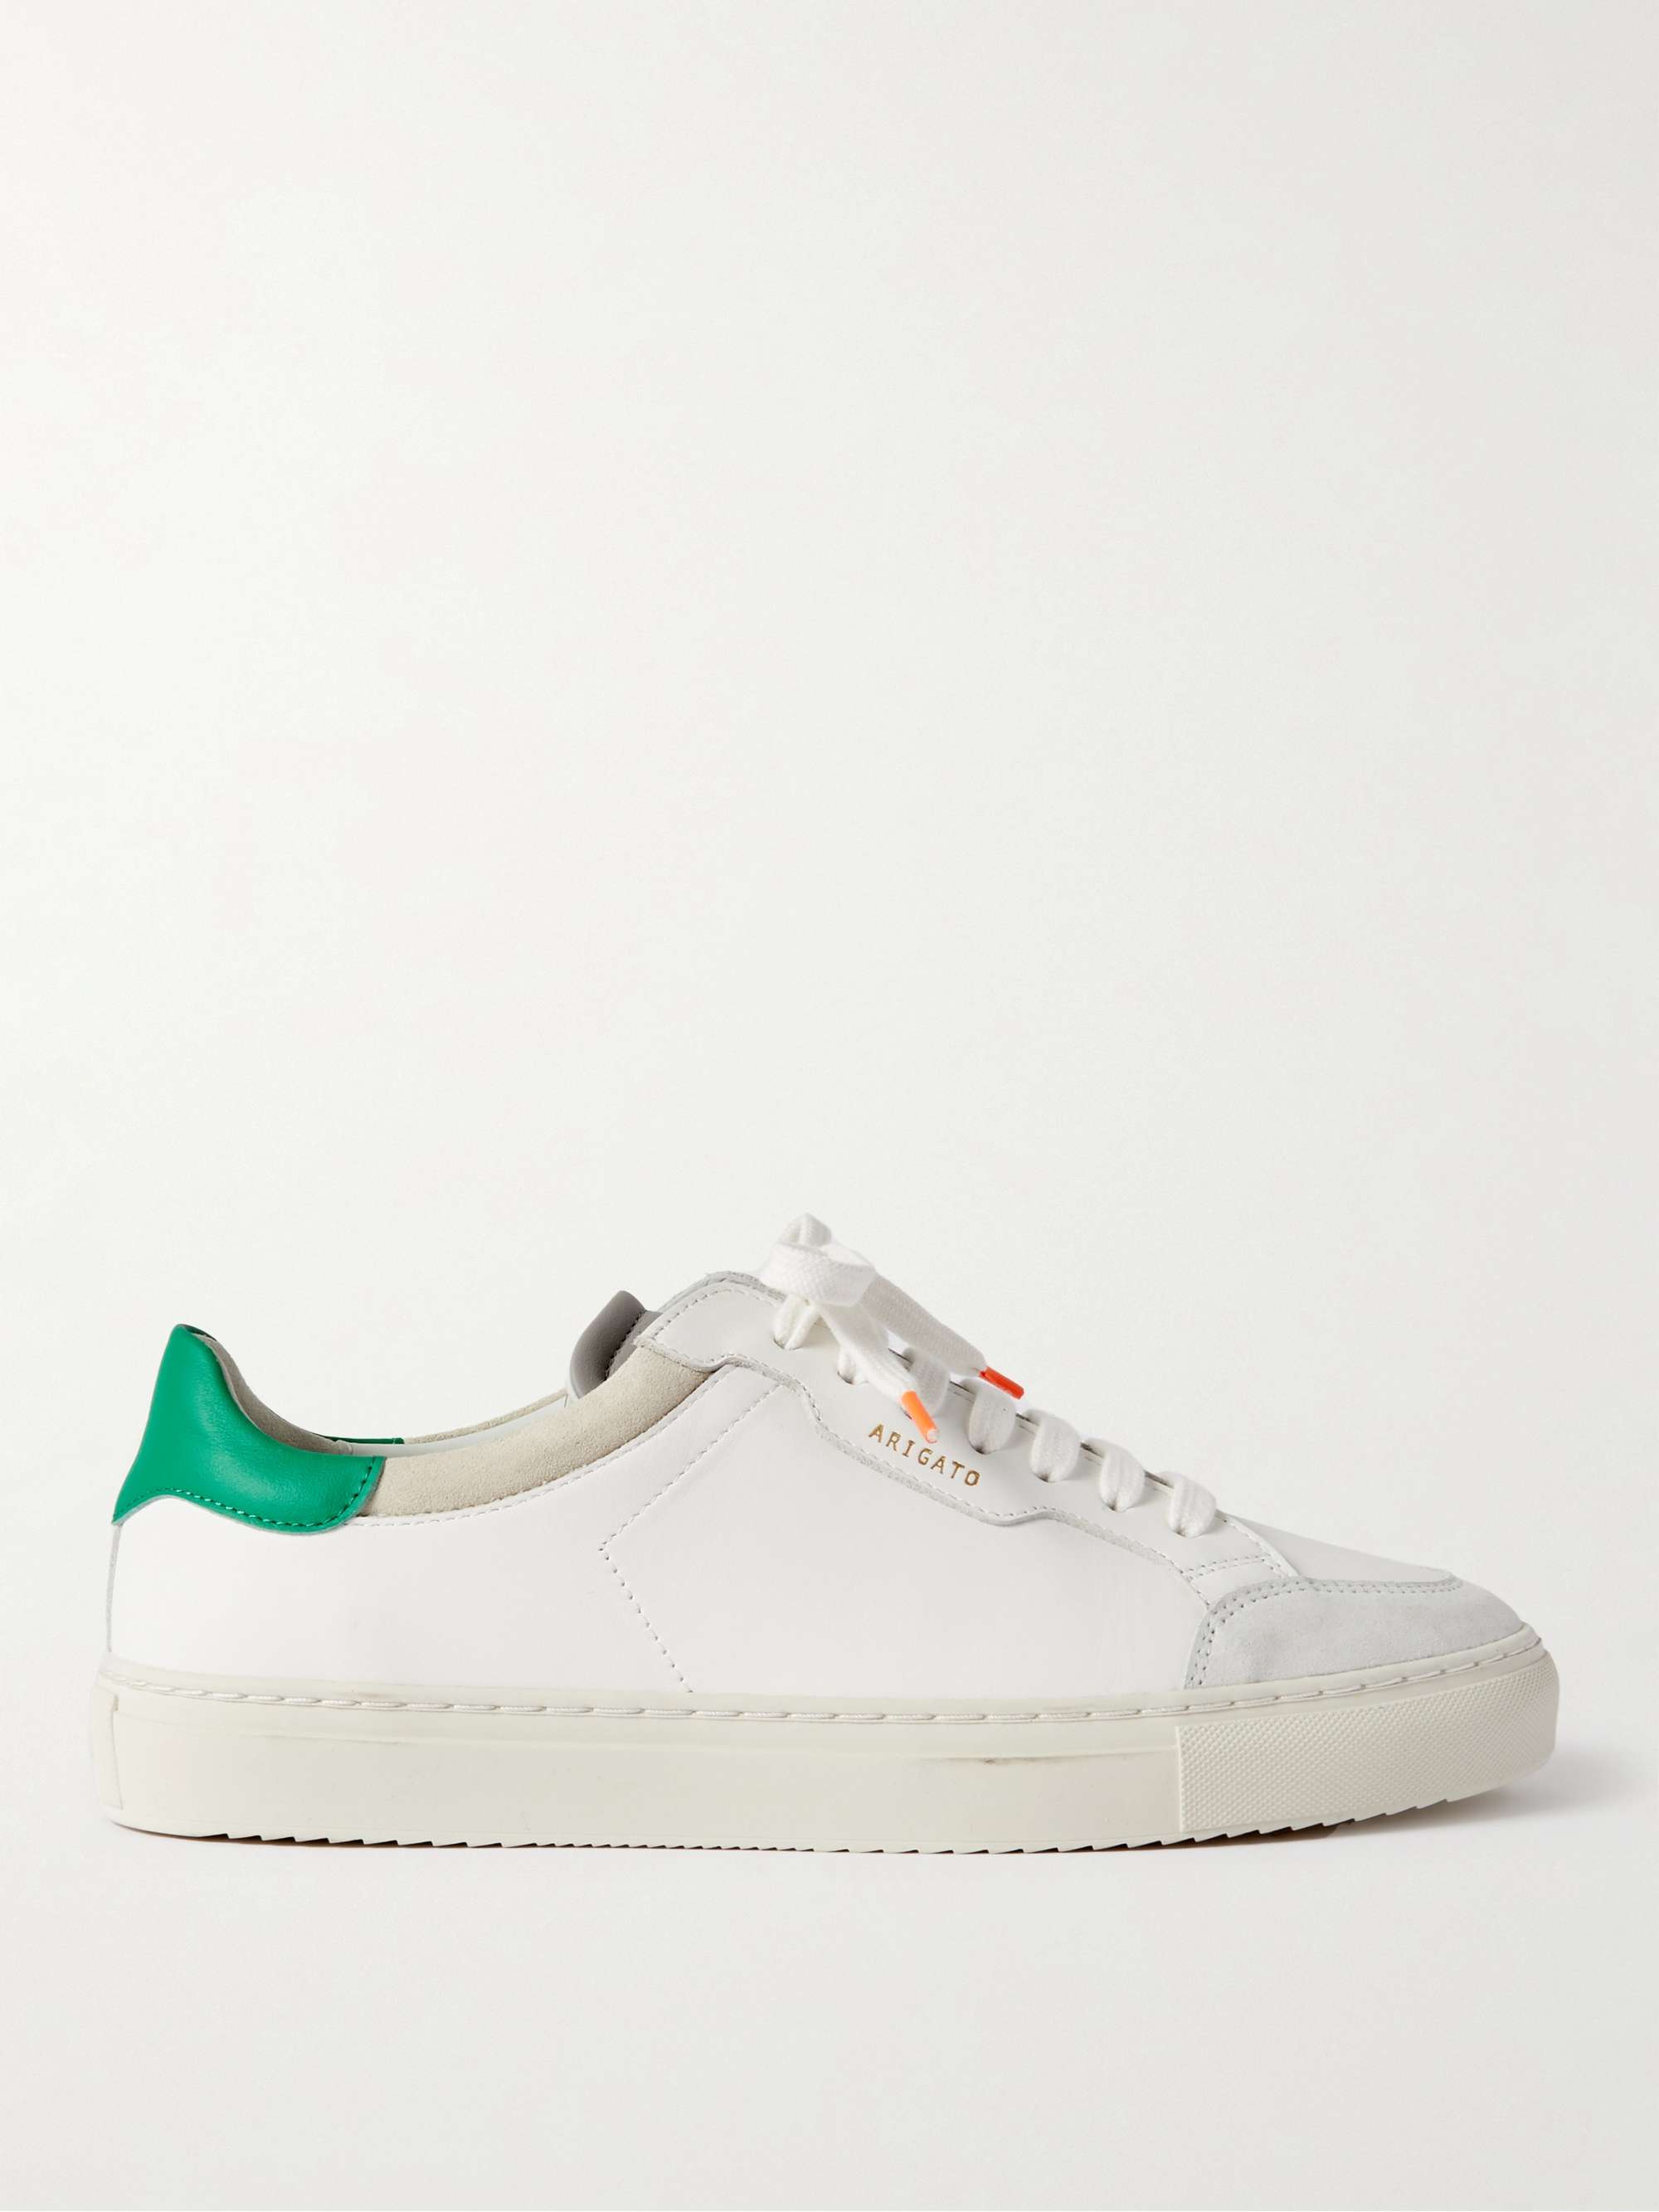 White Clean 180 Nubuck-Trimmed Leather Sneakers | AXEL ARIGATO | MR PORTER